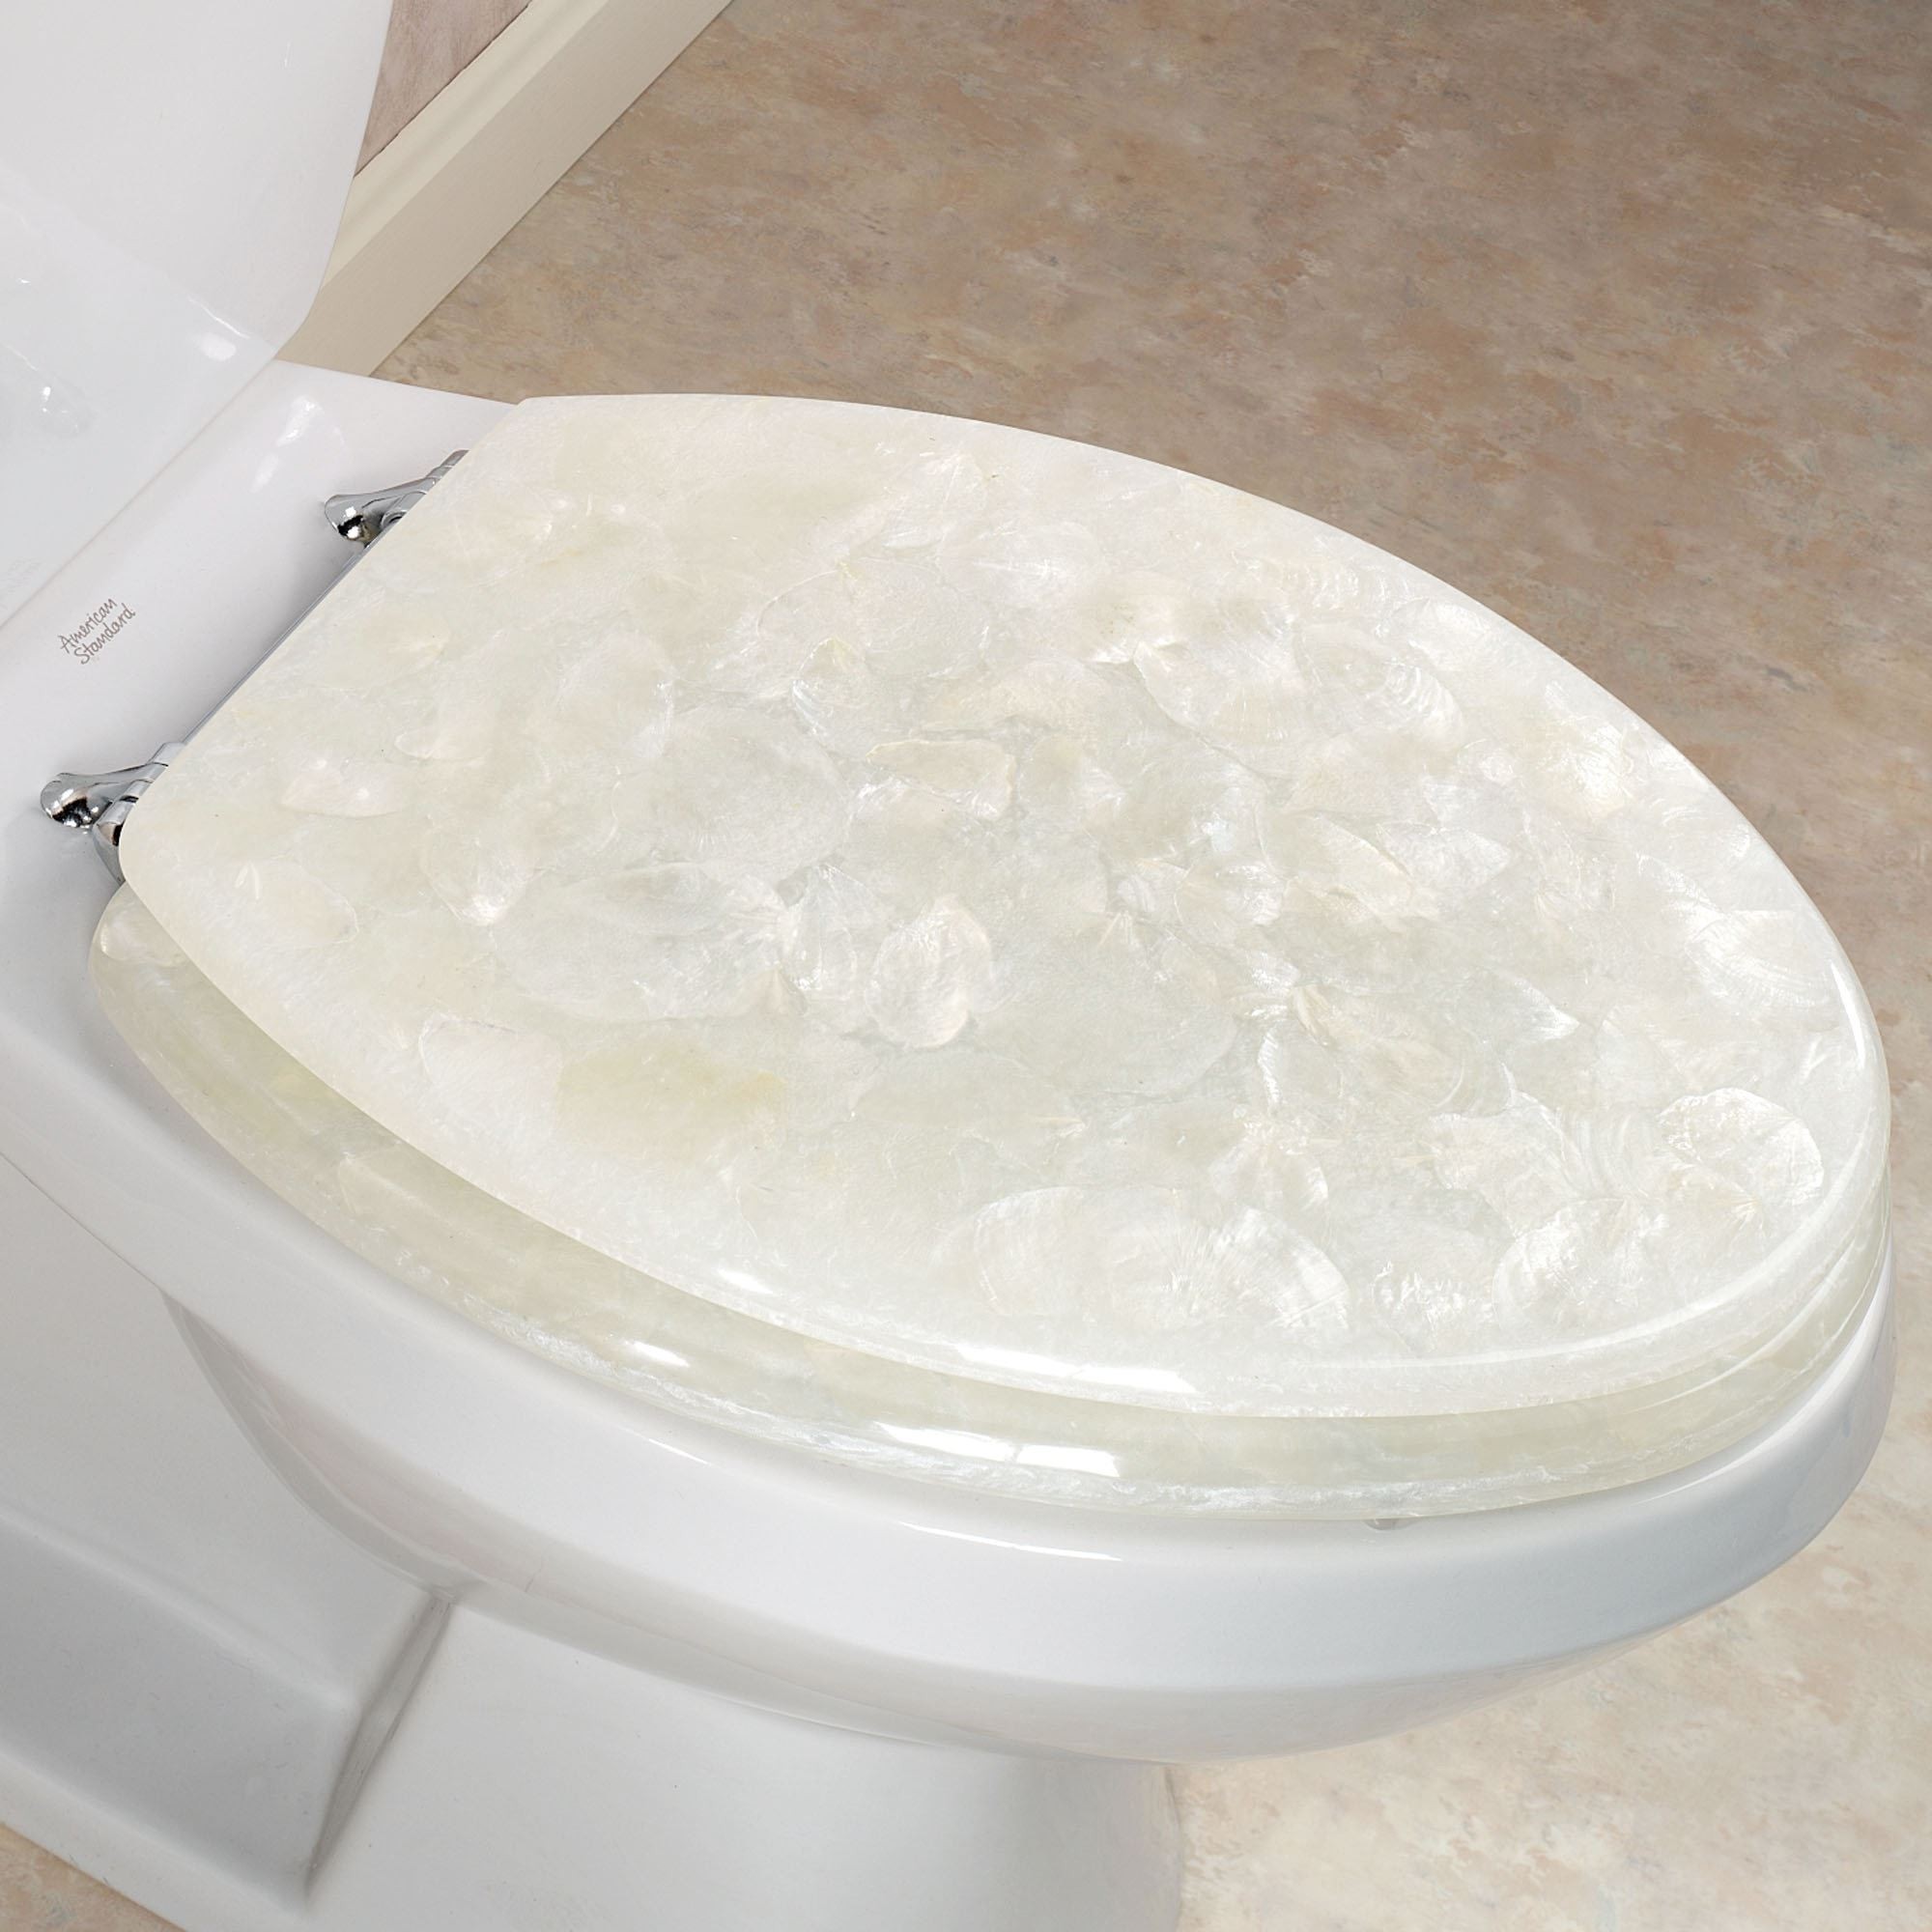 Home capice elongated toilet seat